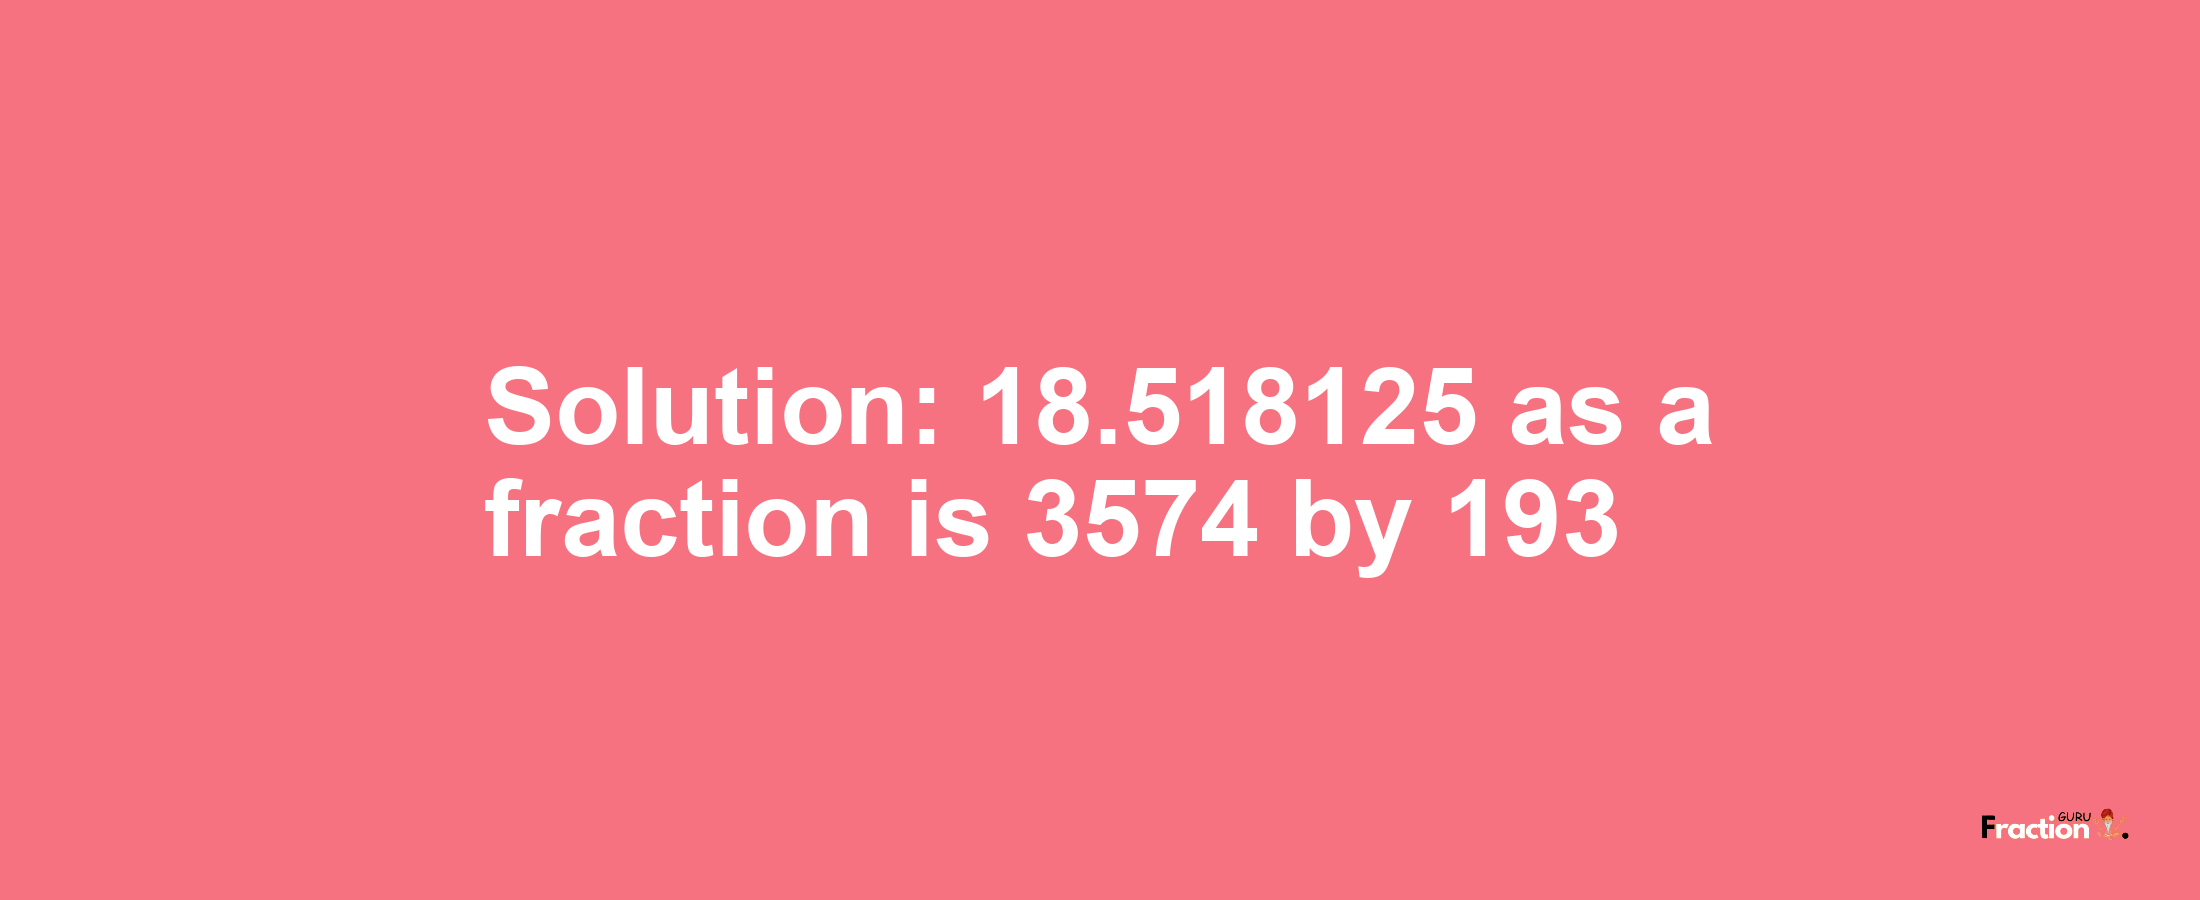 Solution:18.518125 as a fraction is 3574/193